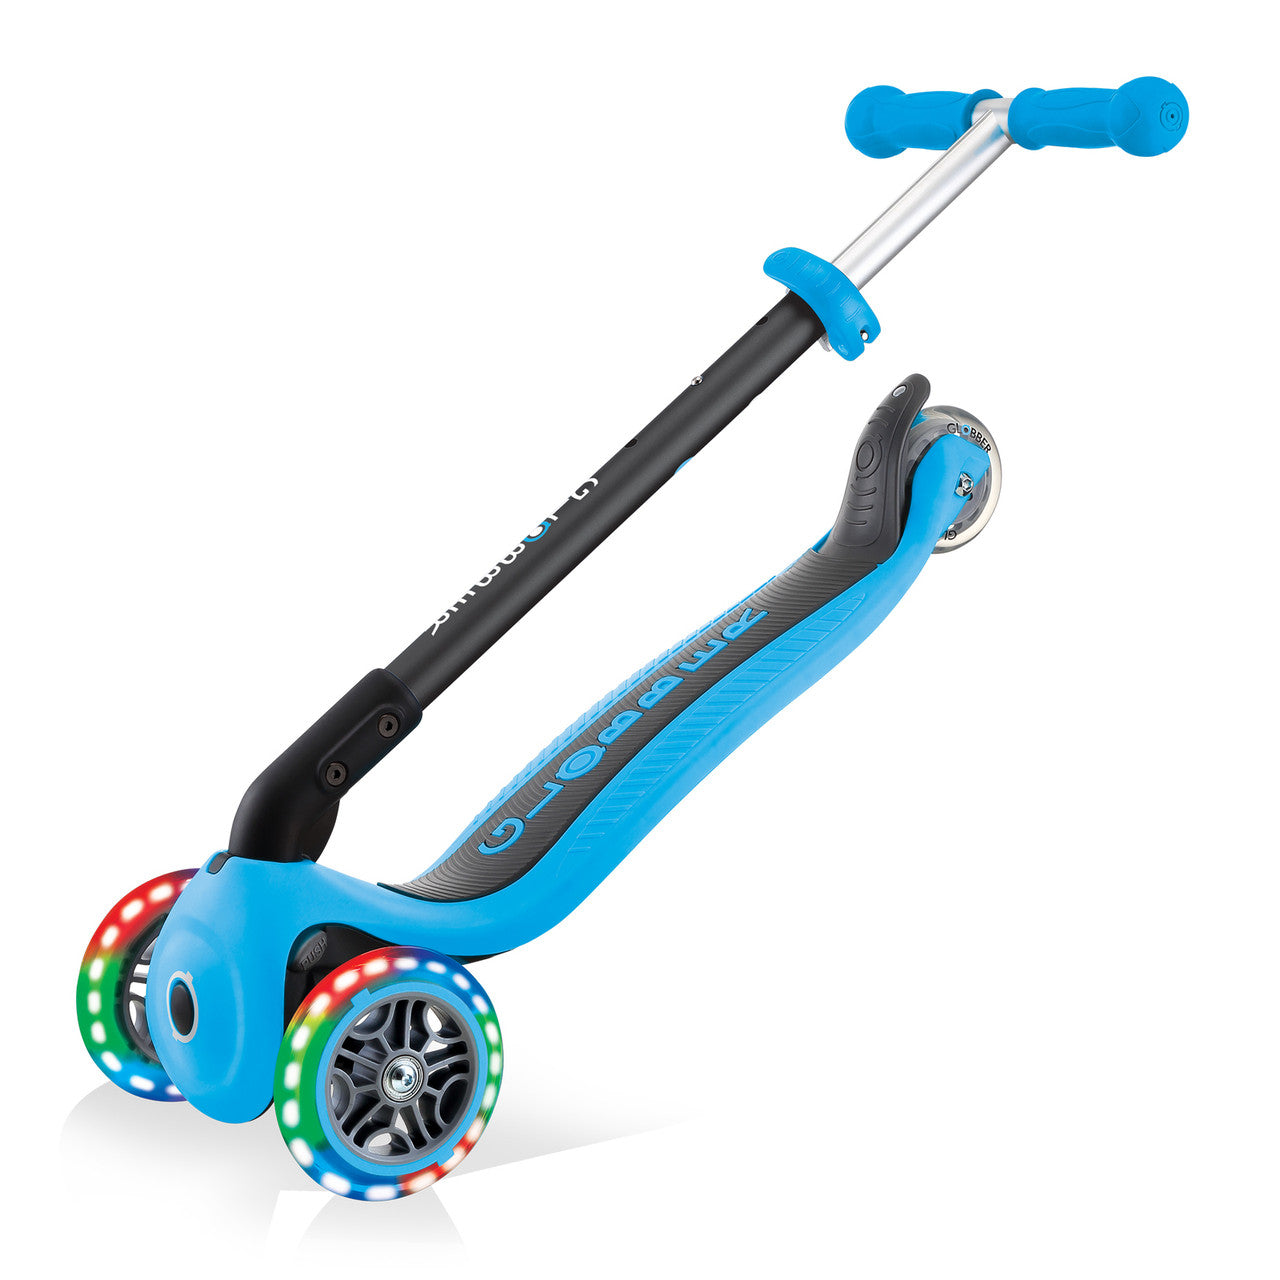 Globber Go Up Foldable Plus Lights Convertible Scooter - Sky Blue